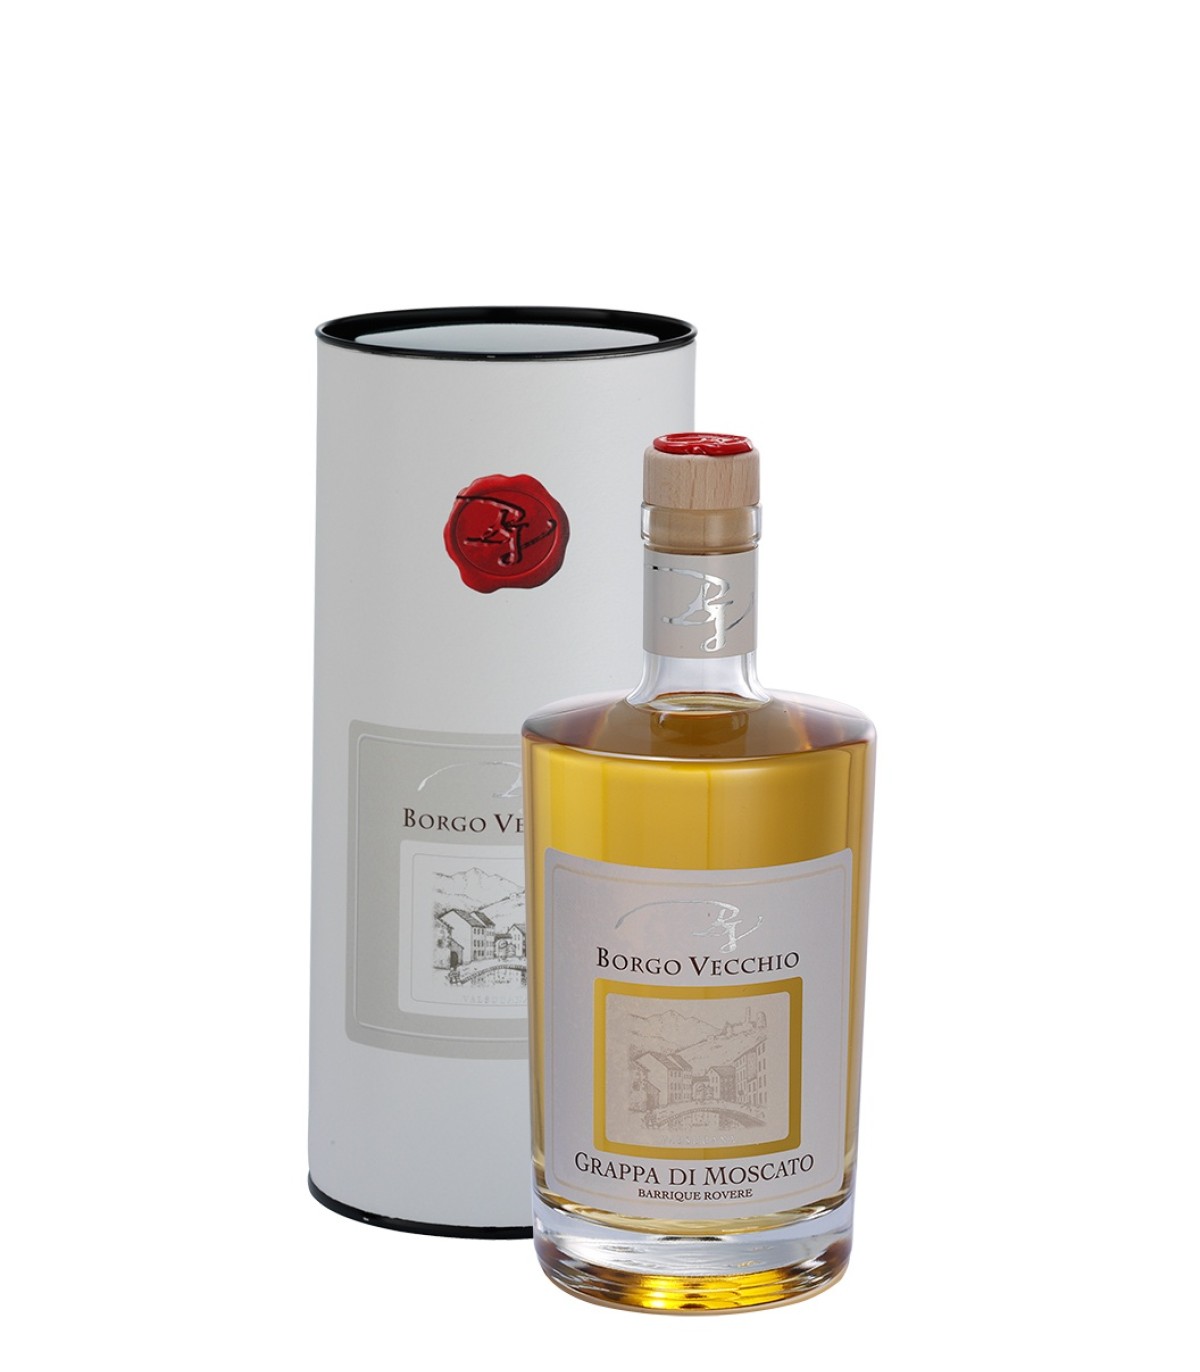 Grappa of Moscato, Barrique Oak 50cl in box - Old town